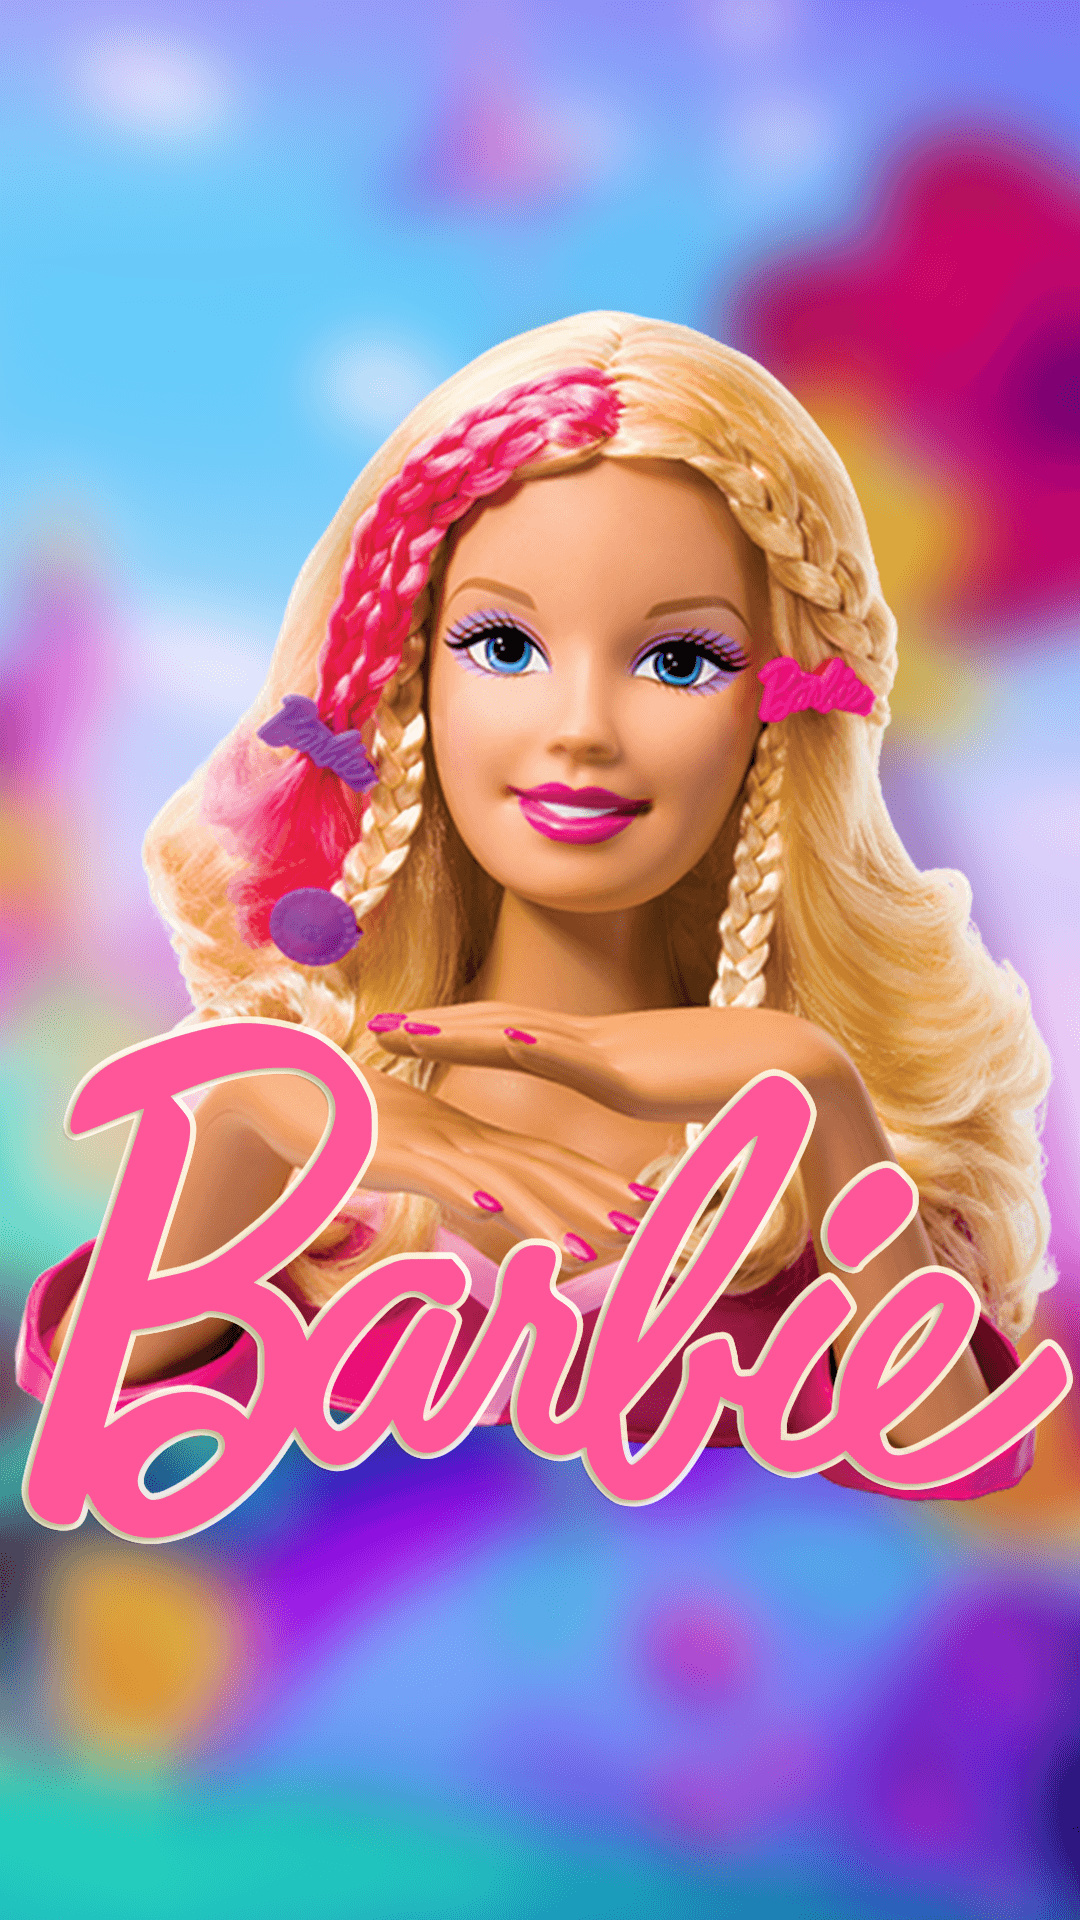 Barbie mobile wallpapers, Phone backgrounds, Barbie theme, Mobile doll wallpapers, 1080x1920 Full HD Handy